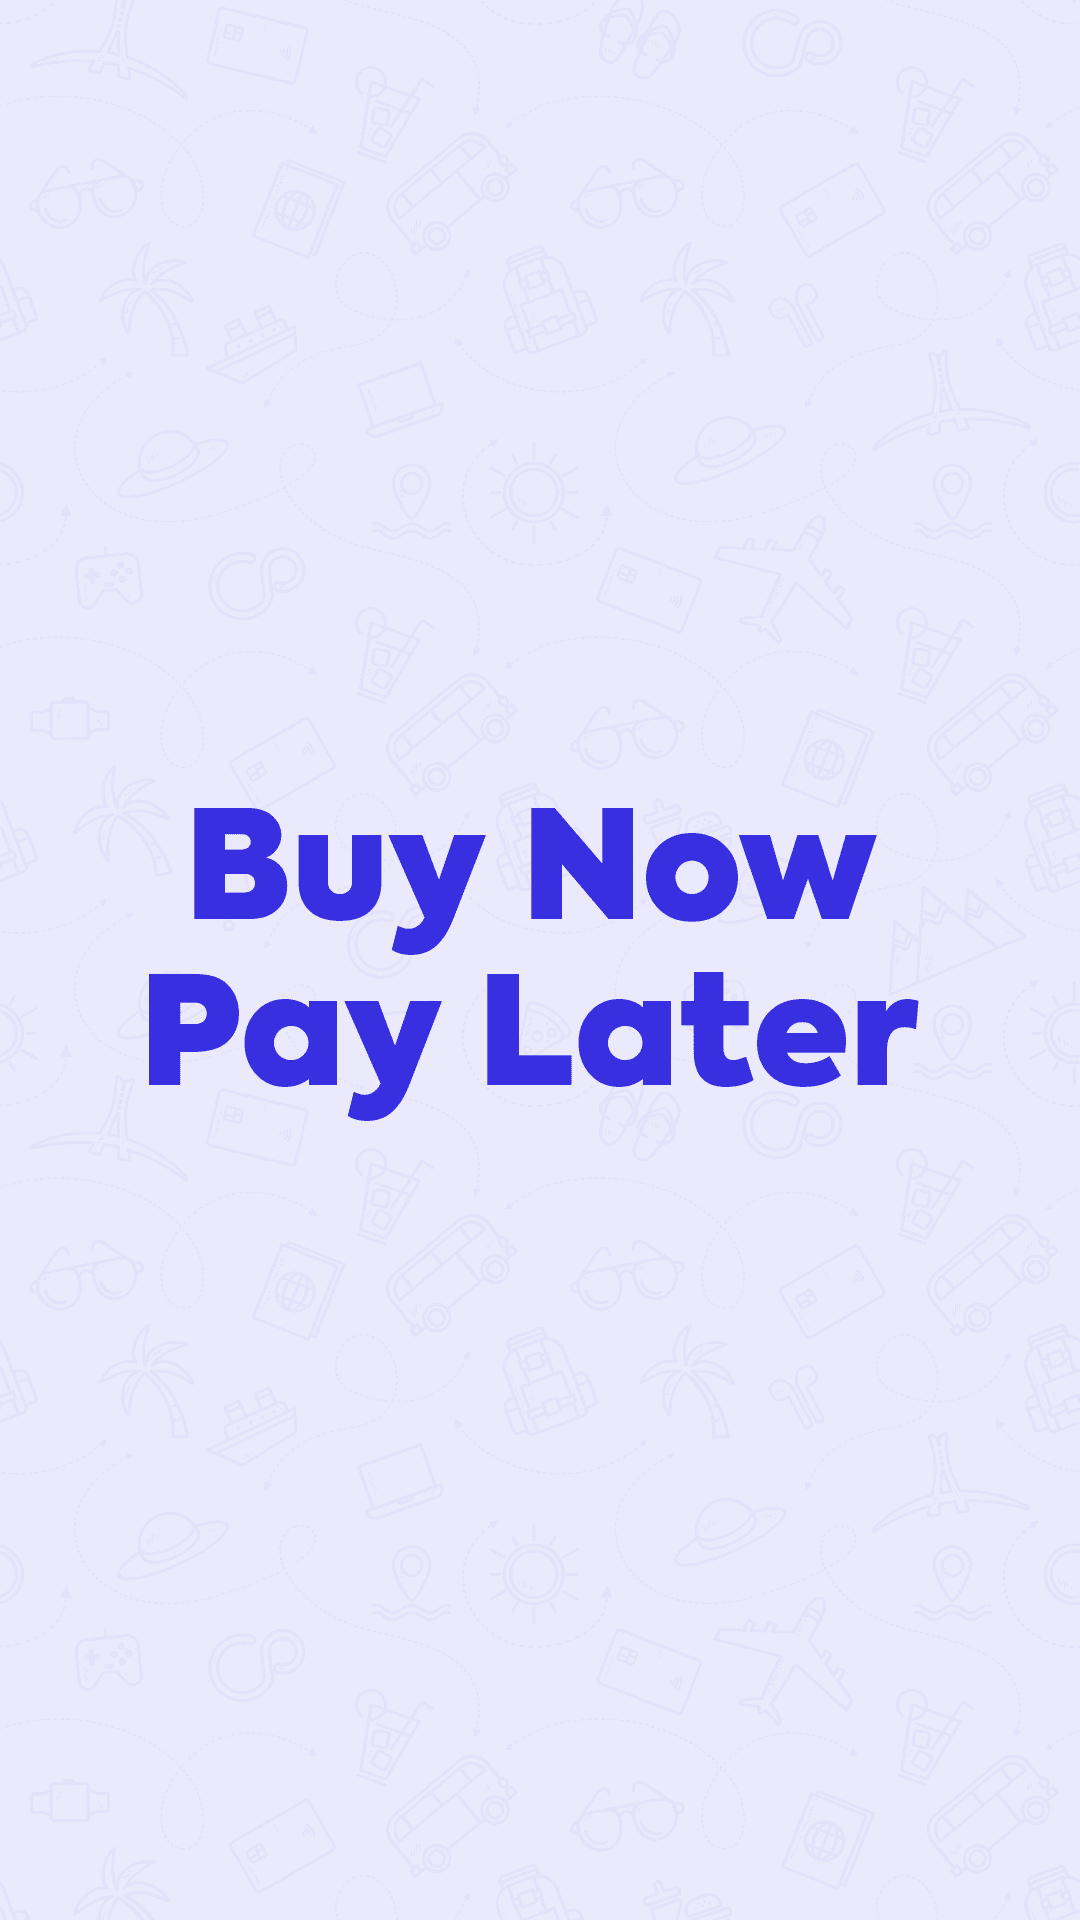 How to Buy Now & Pay Later with Dreamworks Using Credpal